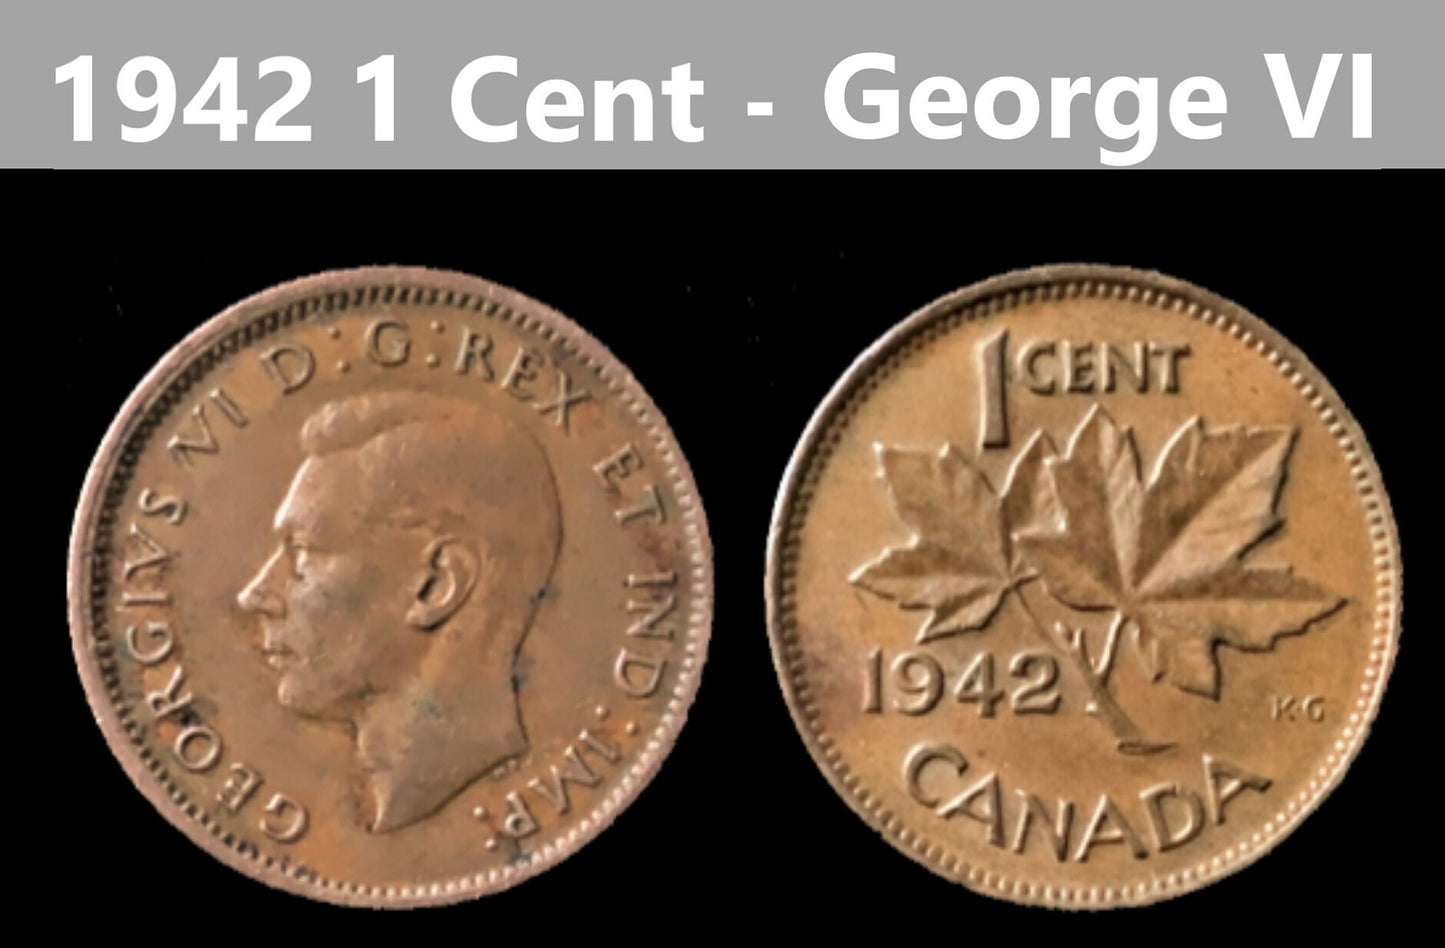 Canadian Small Cent - King George VI - 1937 to 1947 - Select Year(s) / Quantity